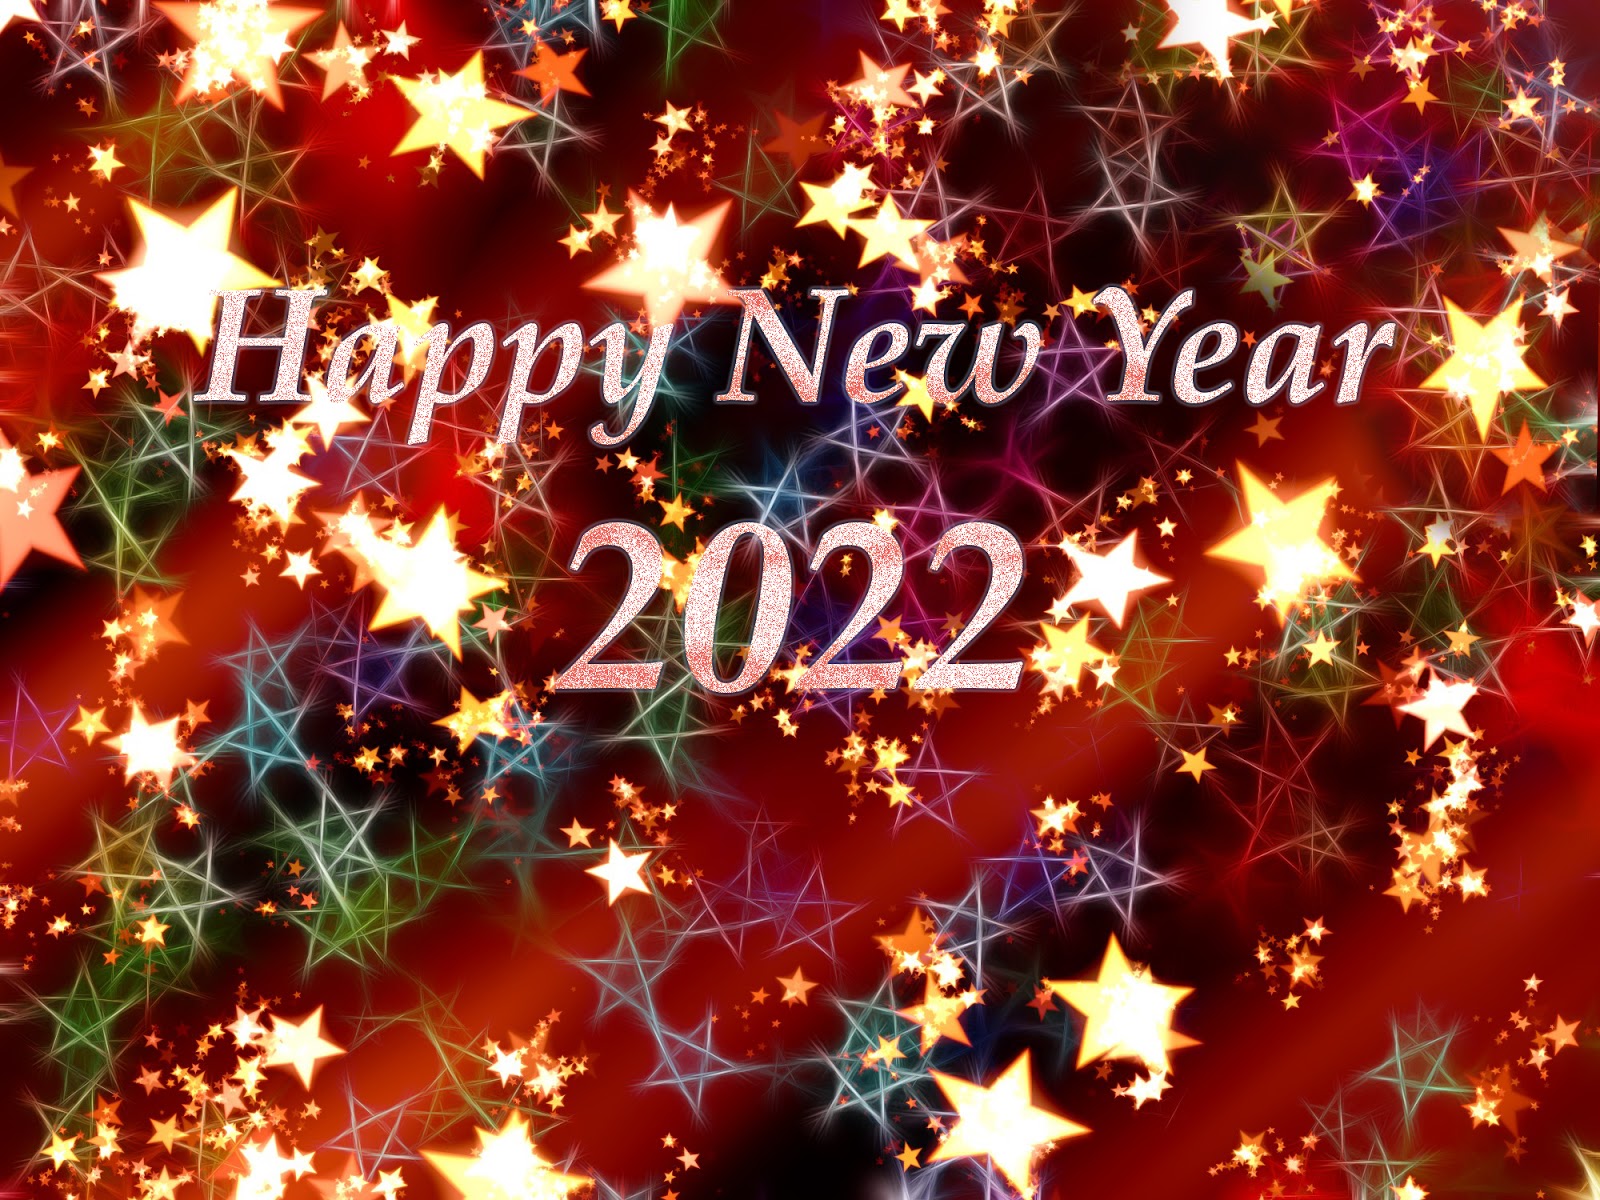 Happy New Year 2022 Images Hd